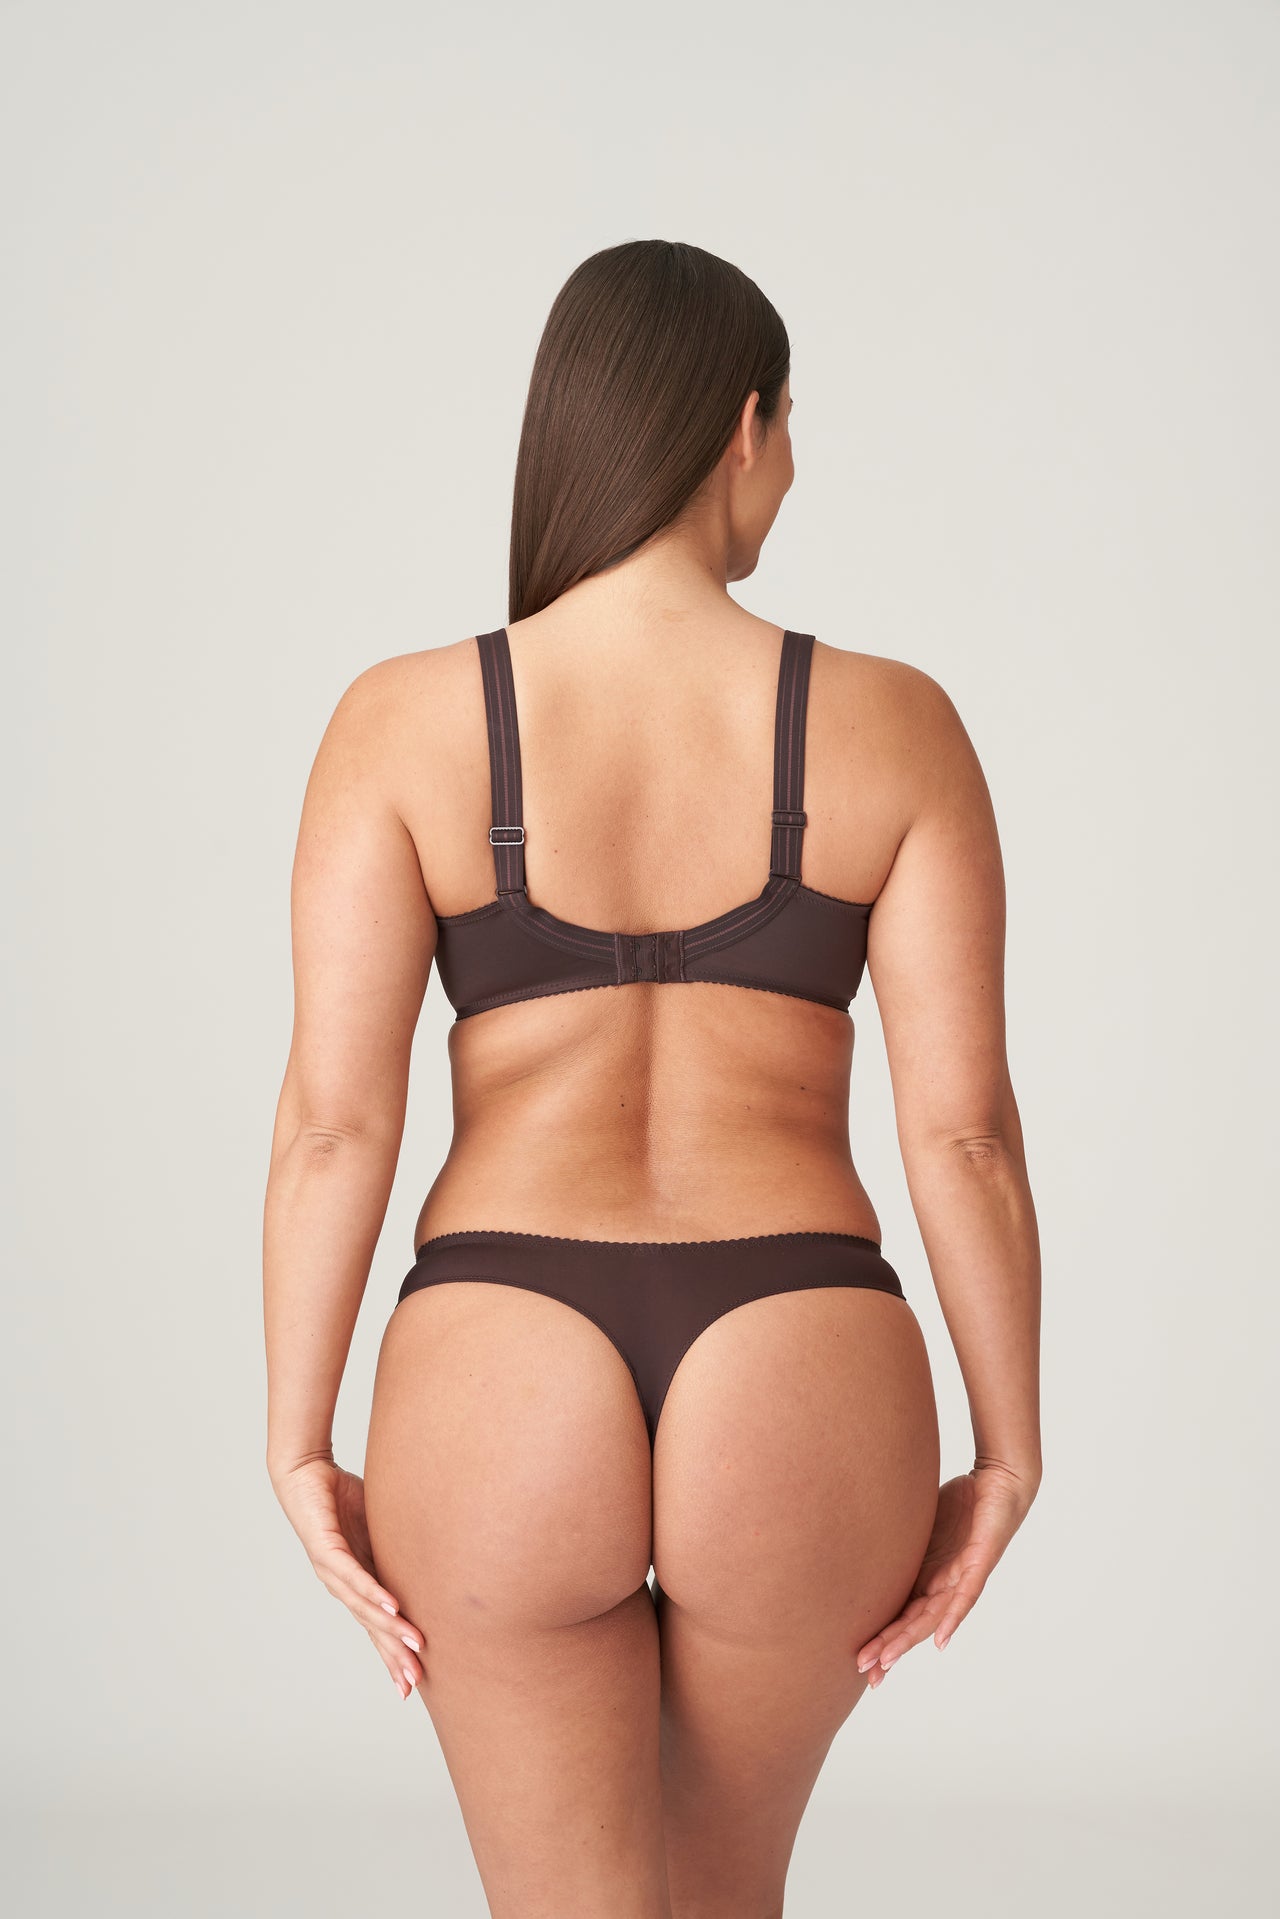 Deauville Ristretto Thong